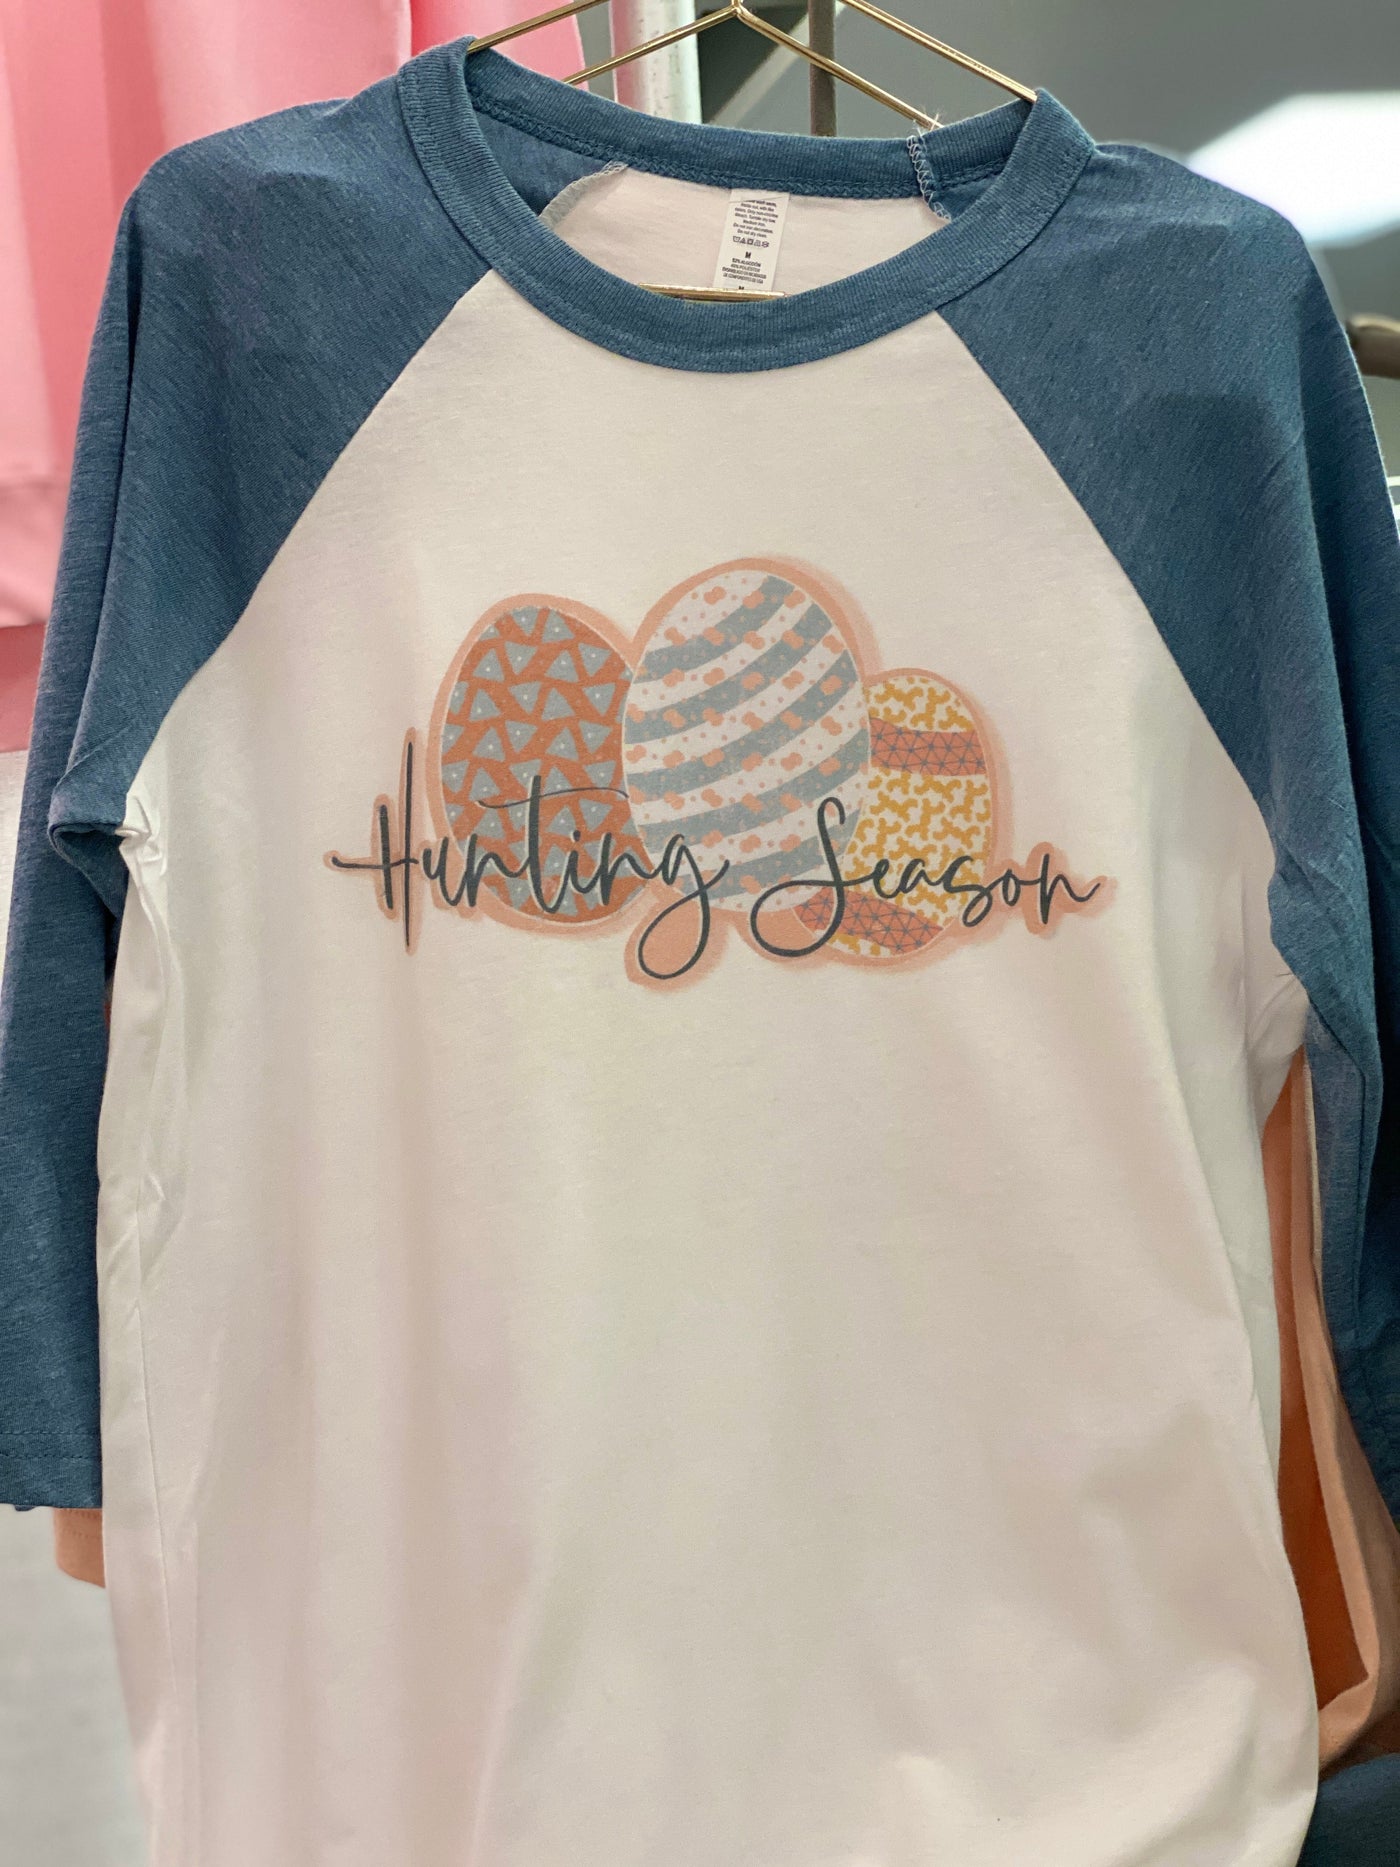 A white raglan with blue sleeves and a graphic of three differently decorated easter eggs and the words "Hunting Season" In a blue cursive font